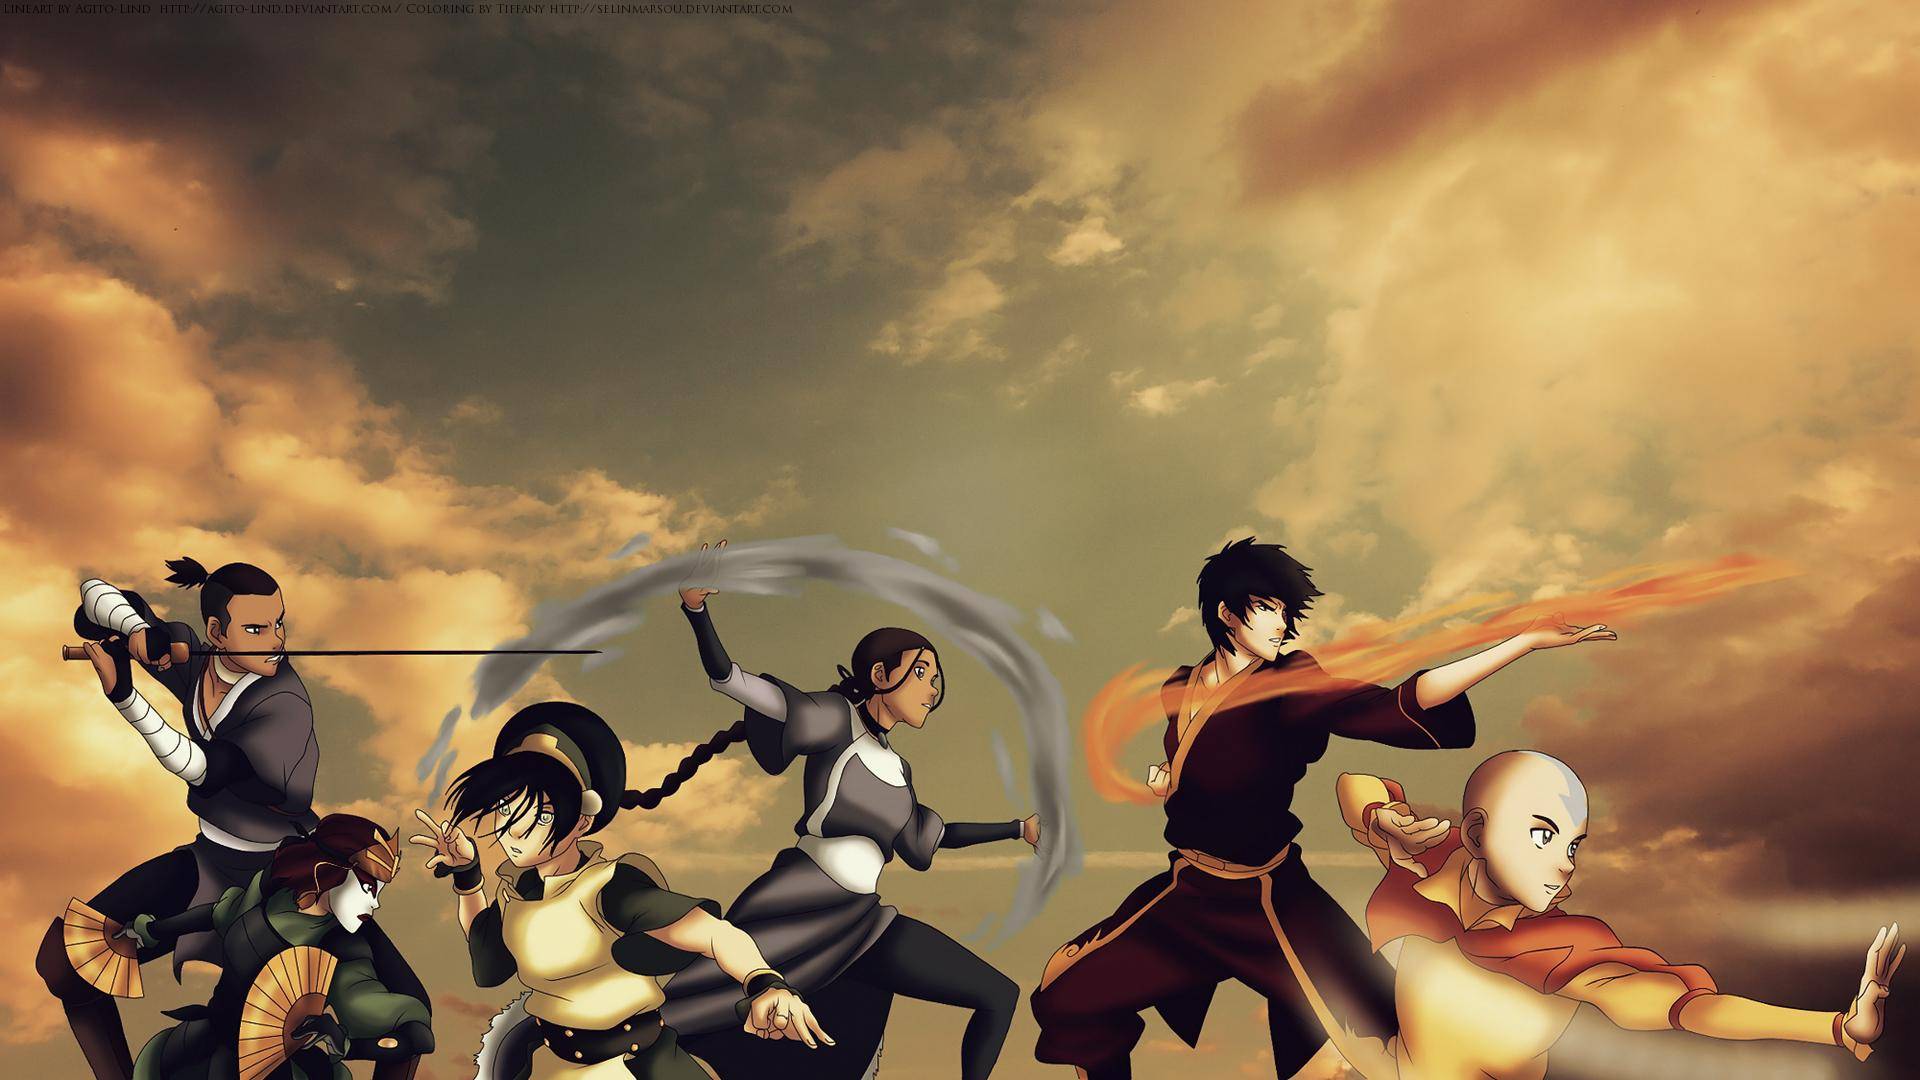 Anime Avatar: The Last Airbender HD Wallpaper and Background